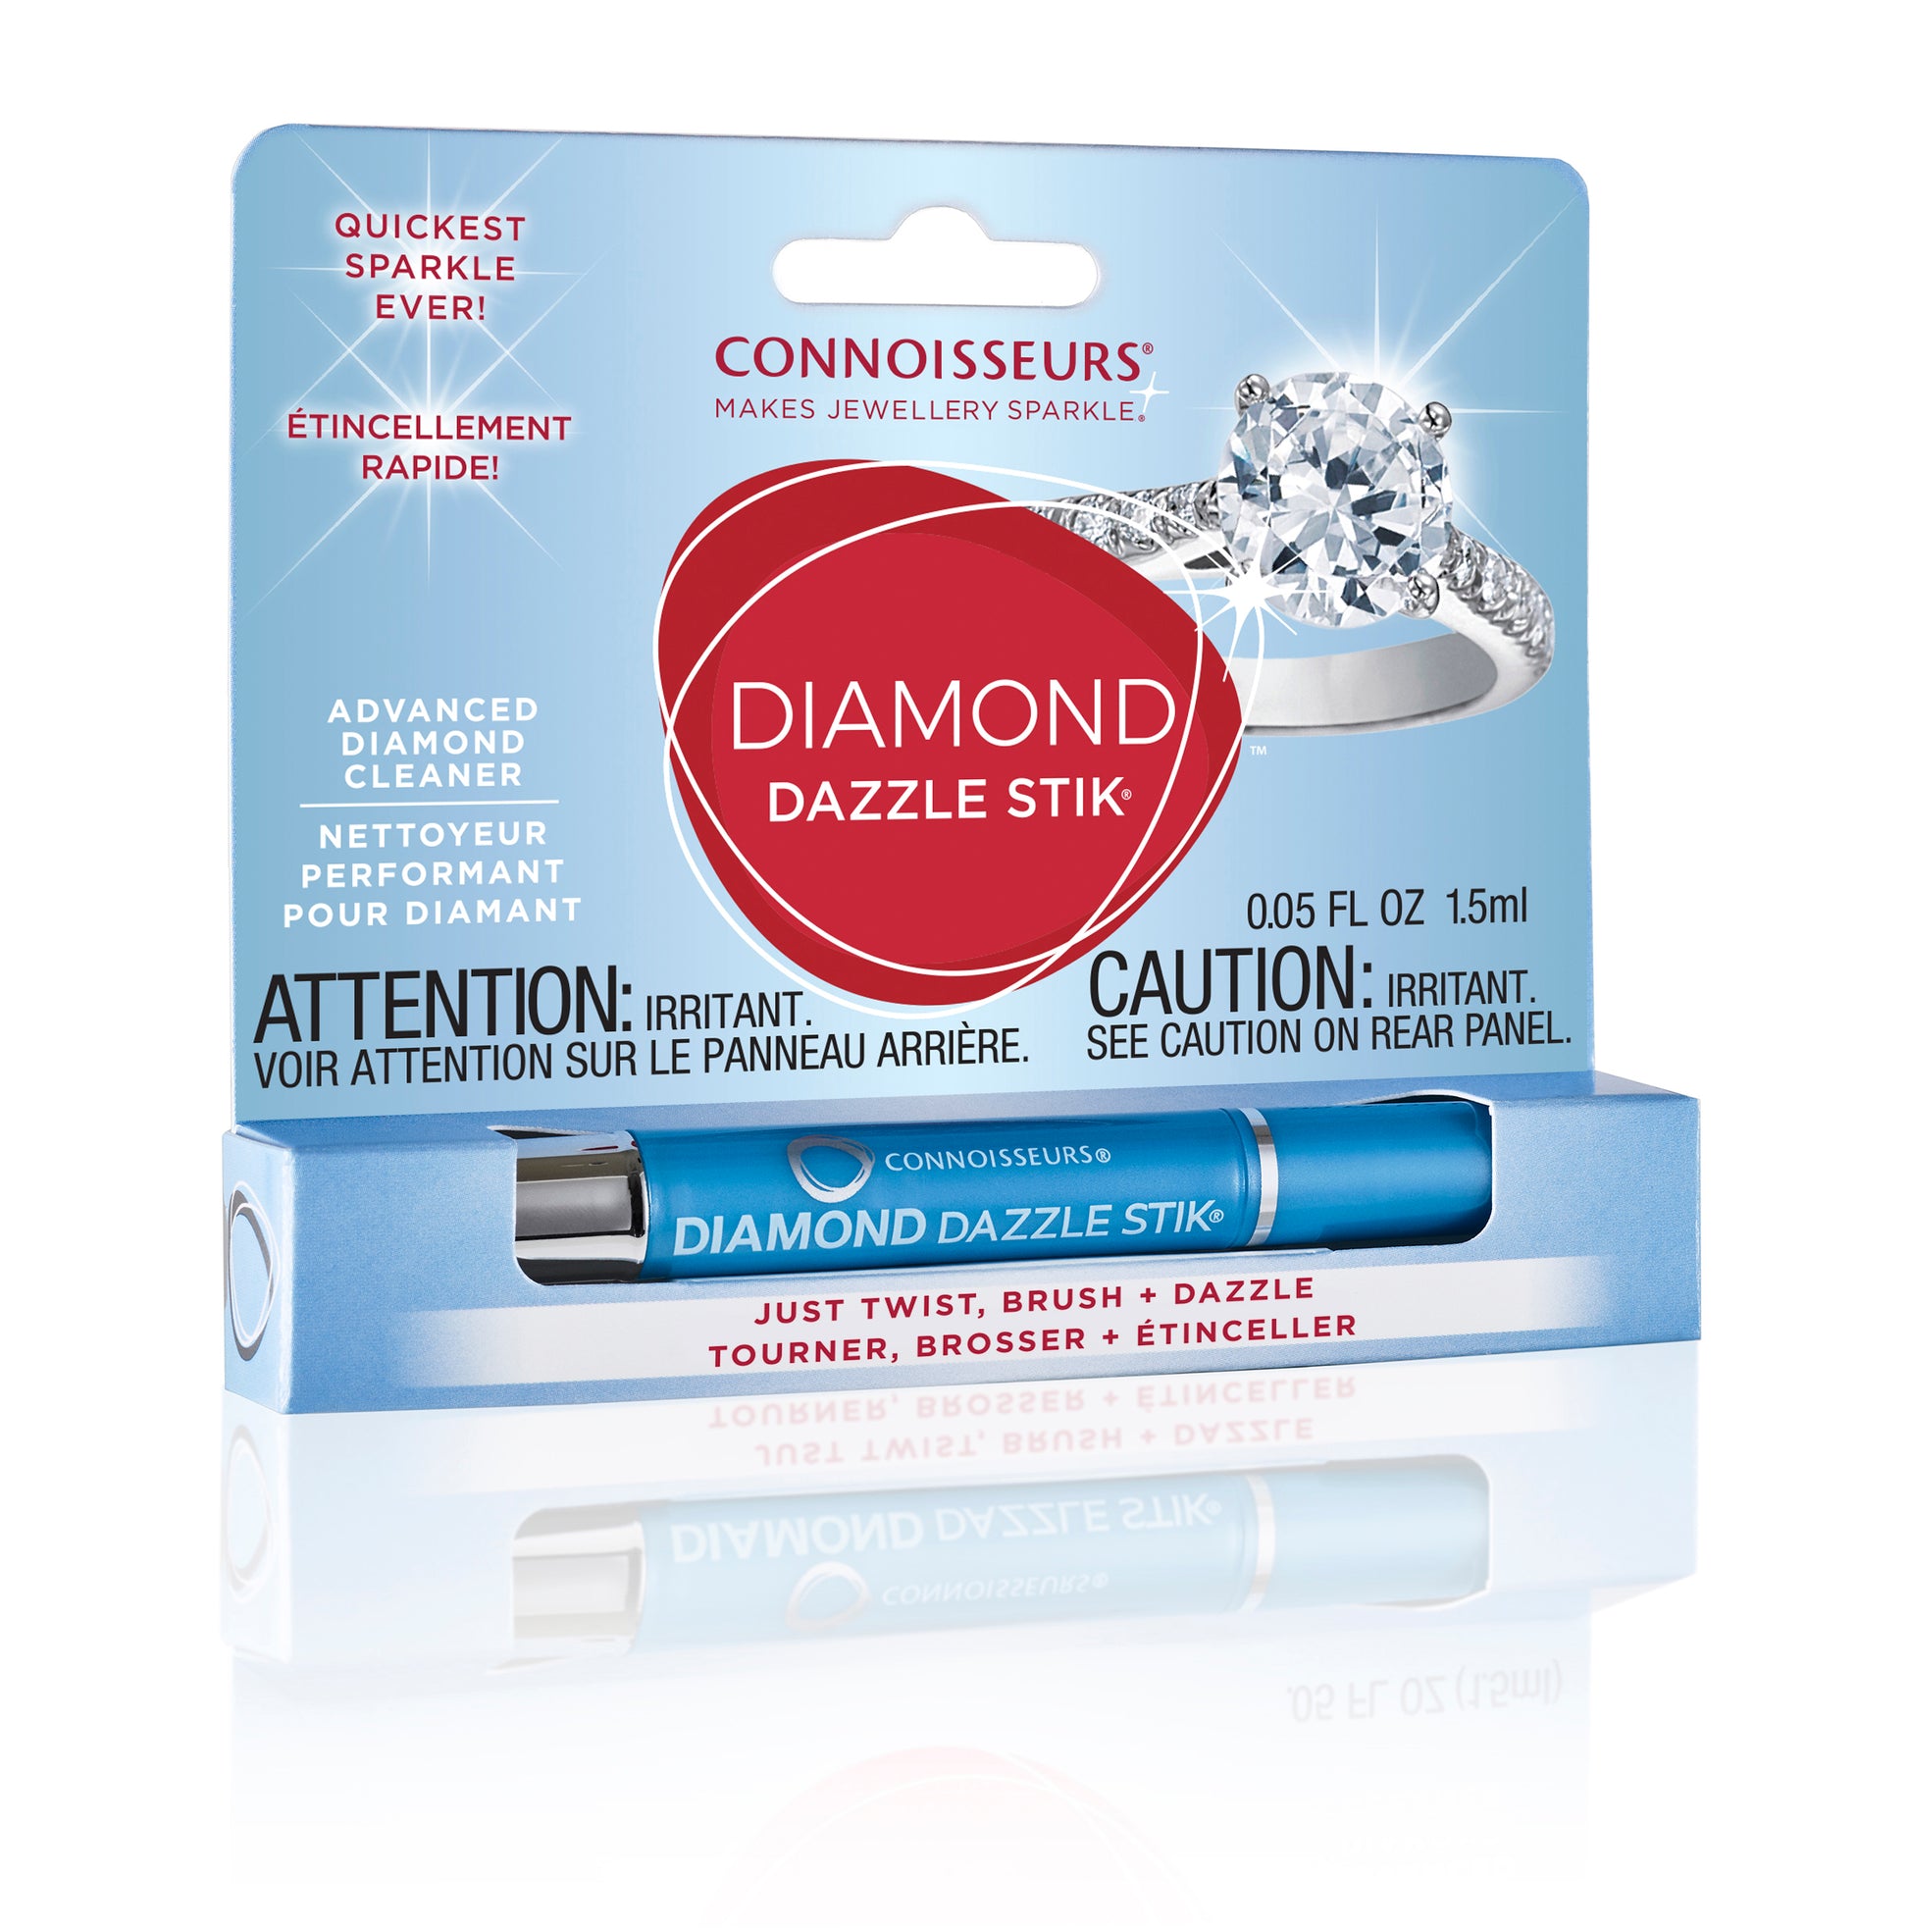 CONNOISSEURS Premium Edition Fine Jewelry Cleaner Solution for